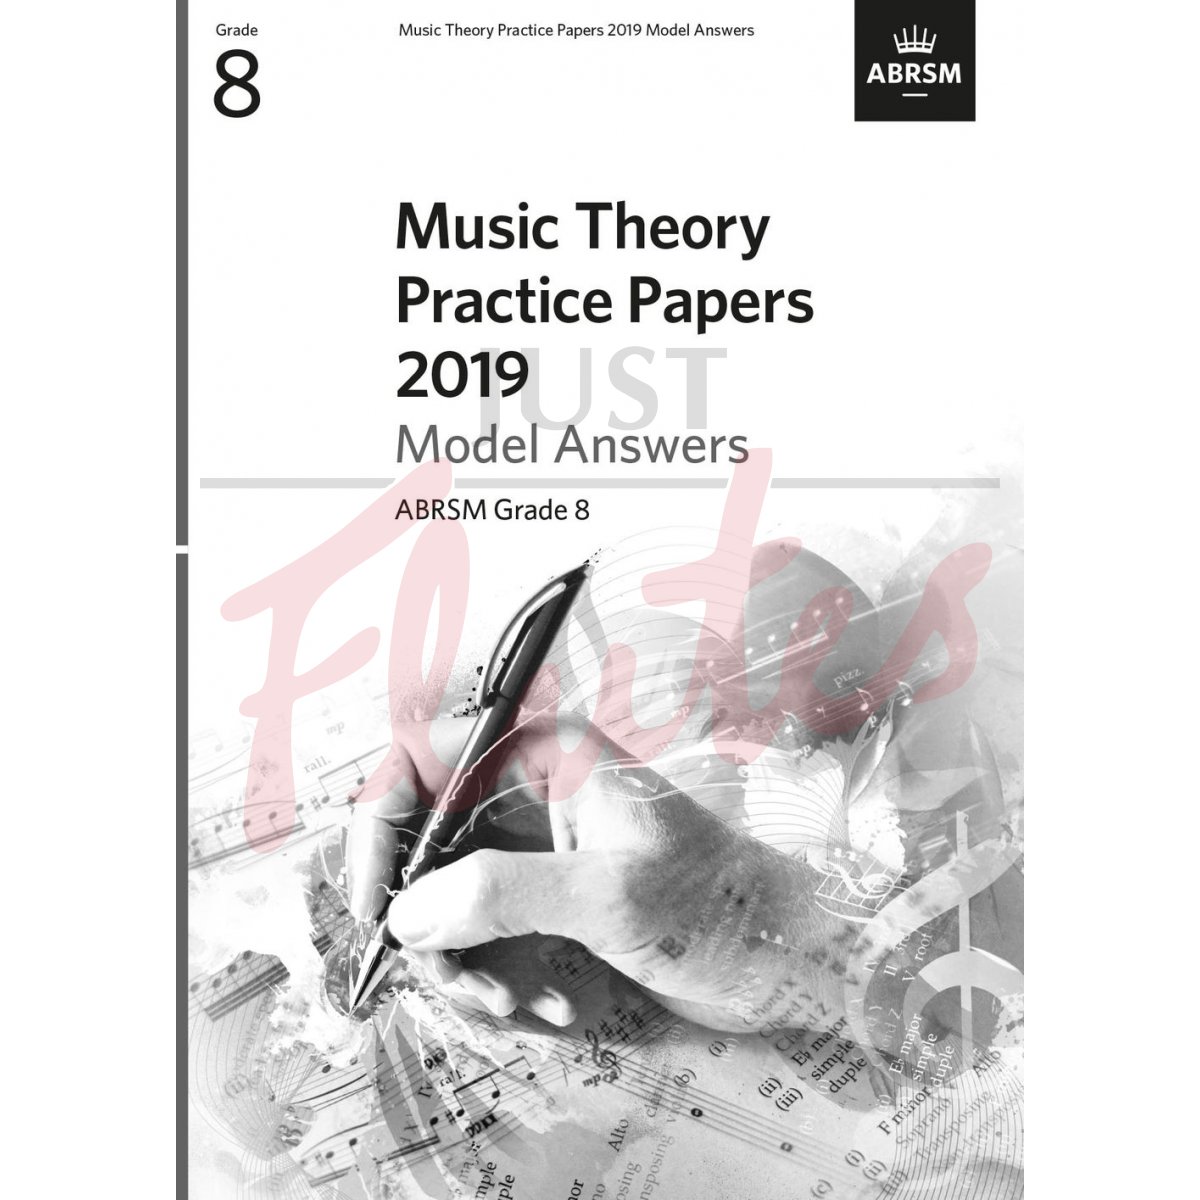 Music Theory Practice Papers 2019 Grade 8 - Model Answers